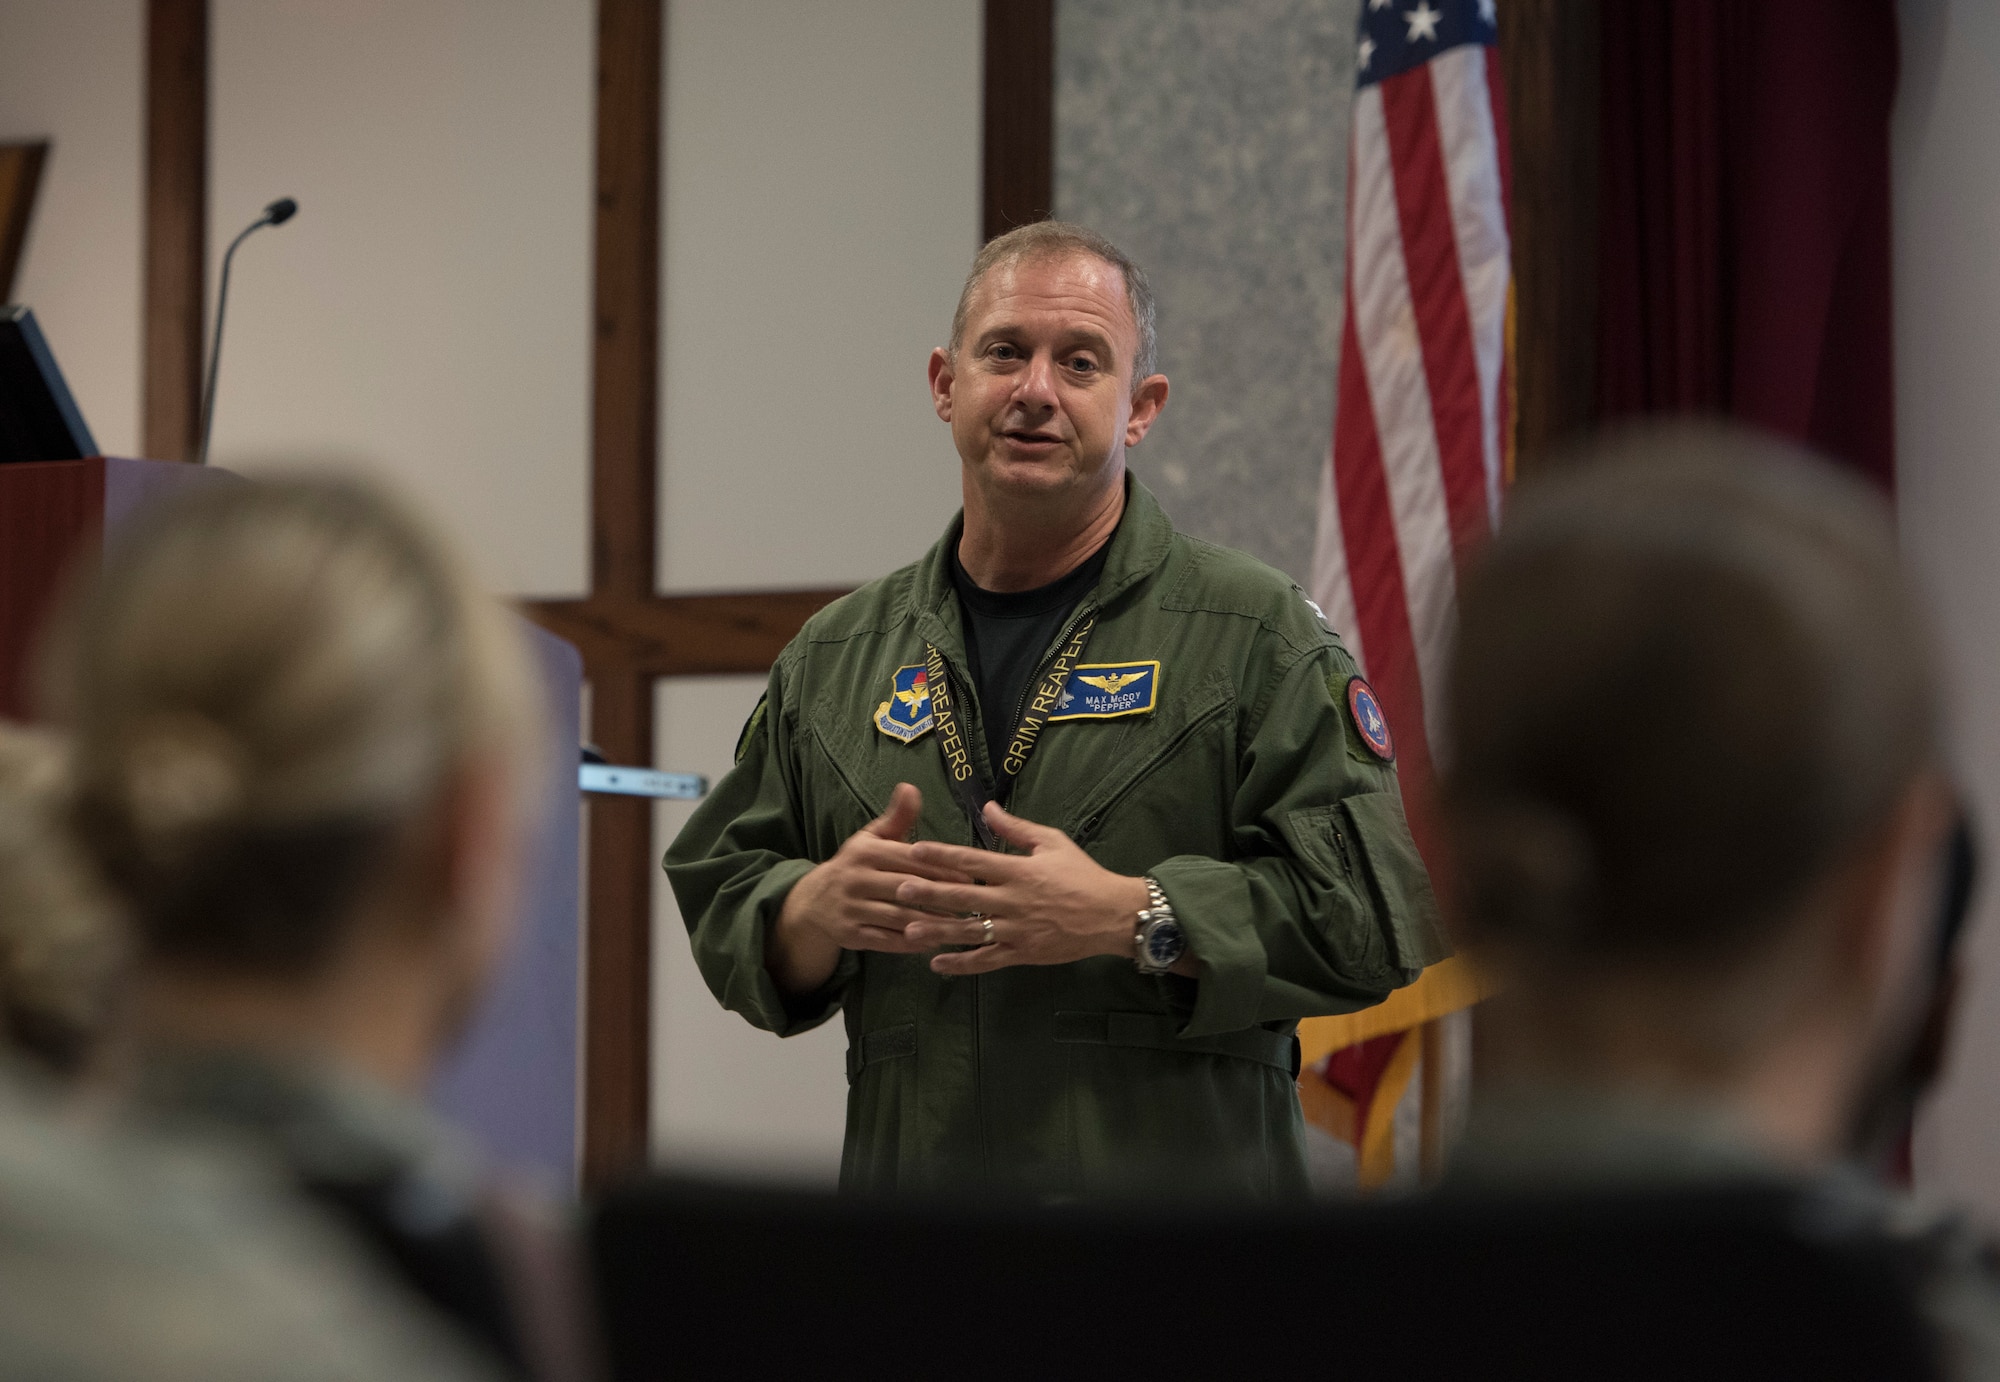 U.S. Navy Capt. Max McCoy, 33rd Fighter Wing vice commander, speaks to members of the 33 FW during the Operational Safety Review May 18, 2018, at Eglin Air Force Base, Fla. During the discussion, McCoy stressed the importance of not making the one day about safety, but using the discussions to ensure we are using professionalism, asking the right questions and using operational risk management every day. (U.S. Air Force photo by Staff Sgt. Peter Thompson)